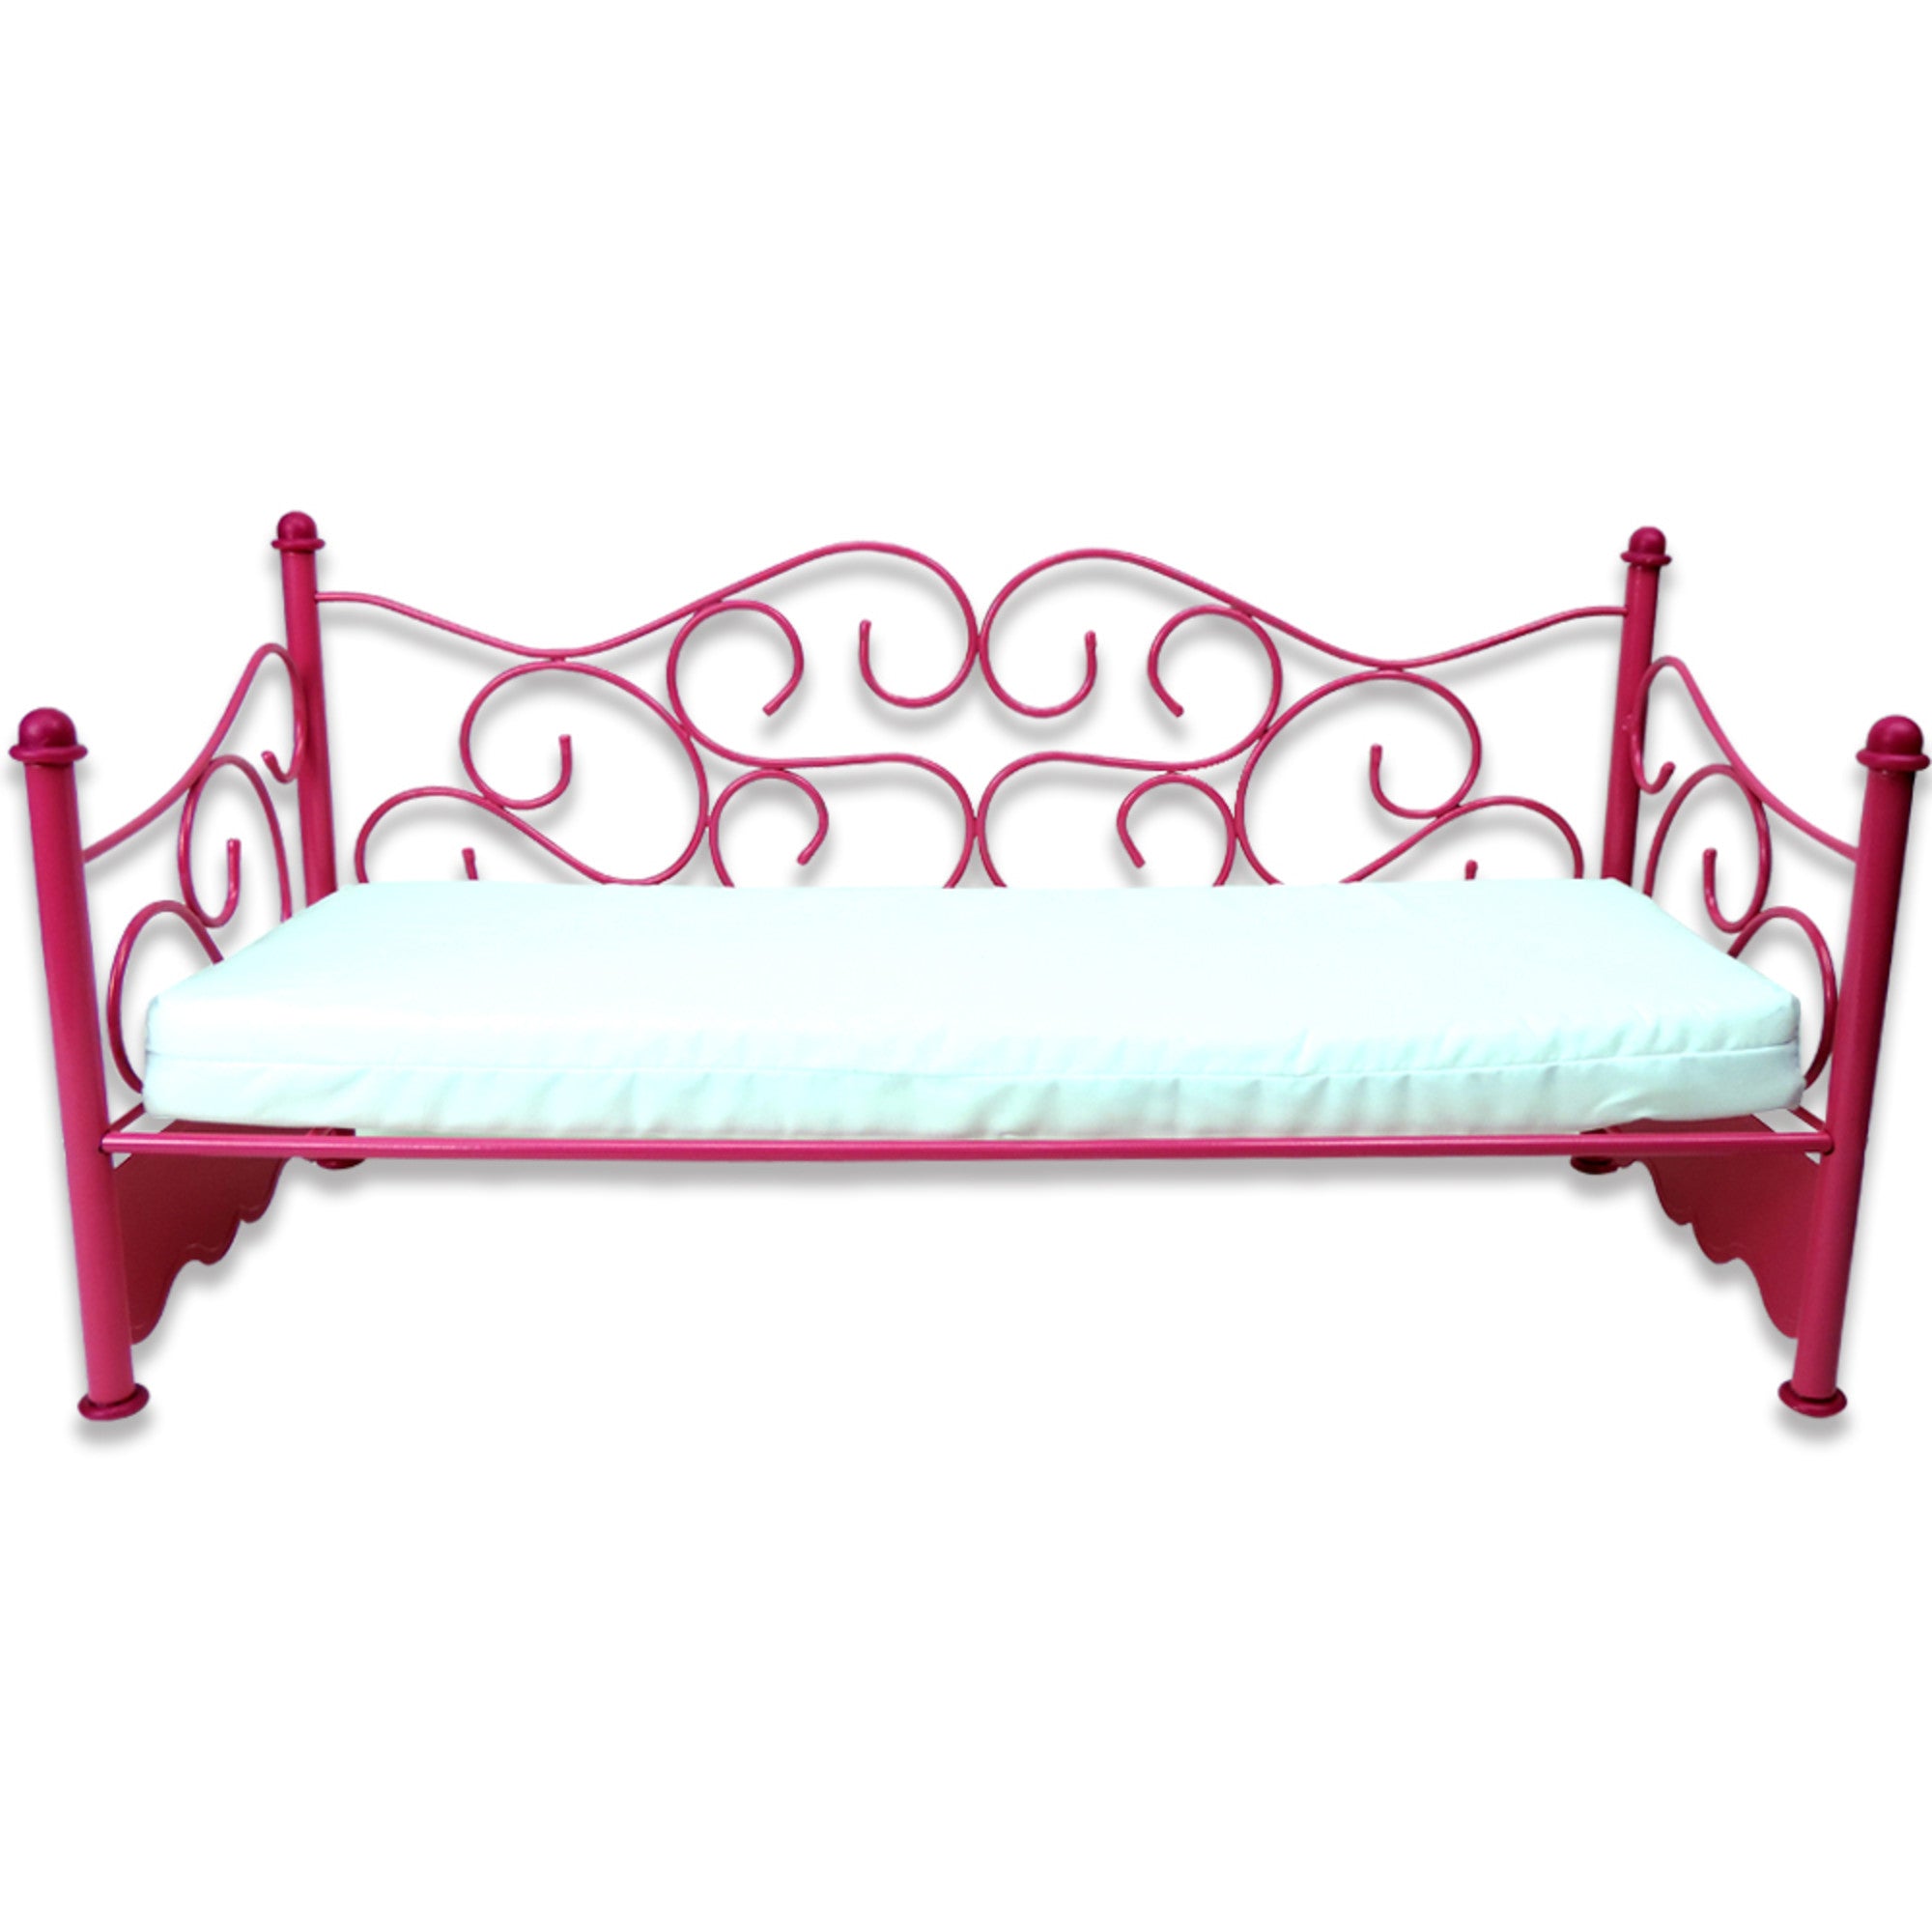 Sophia’s Adorable Wire Metalwork Scroll Daybed with Scalloped Aprons & Mattress for 18” Dolls, Hot Pink